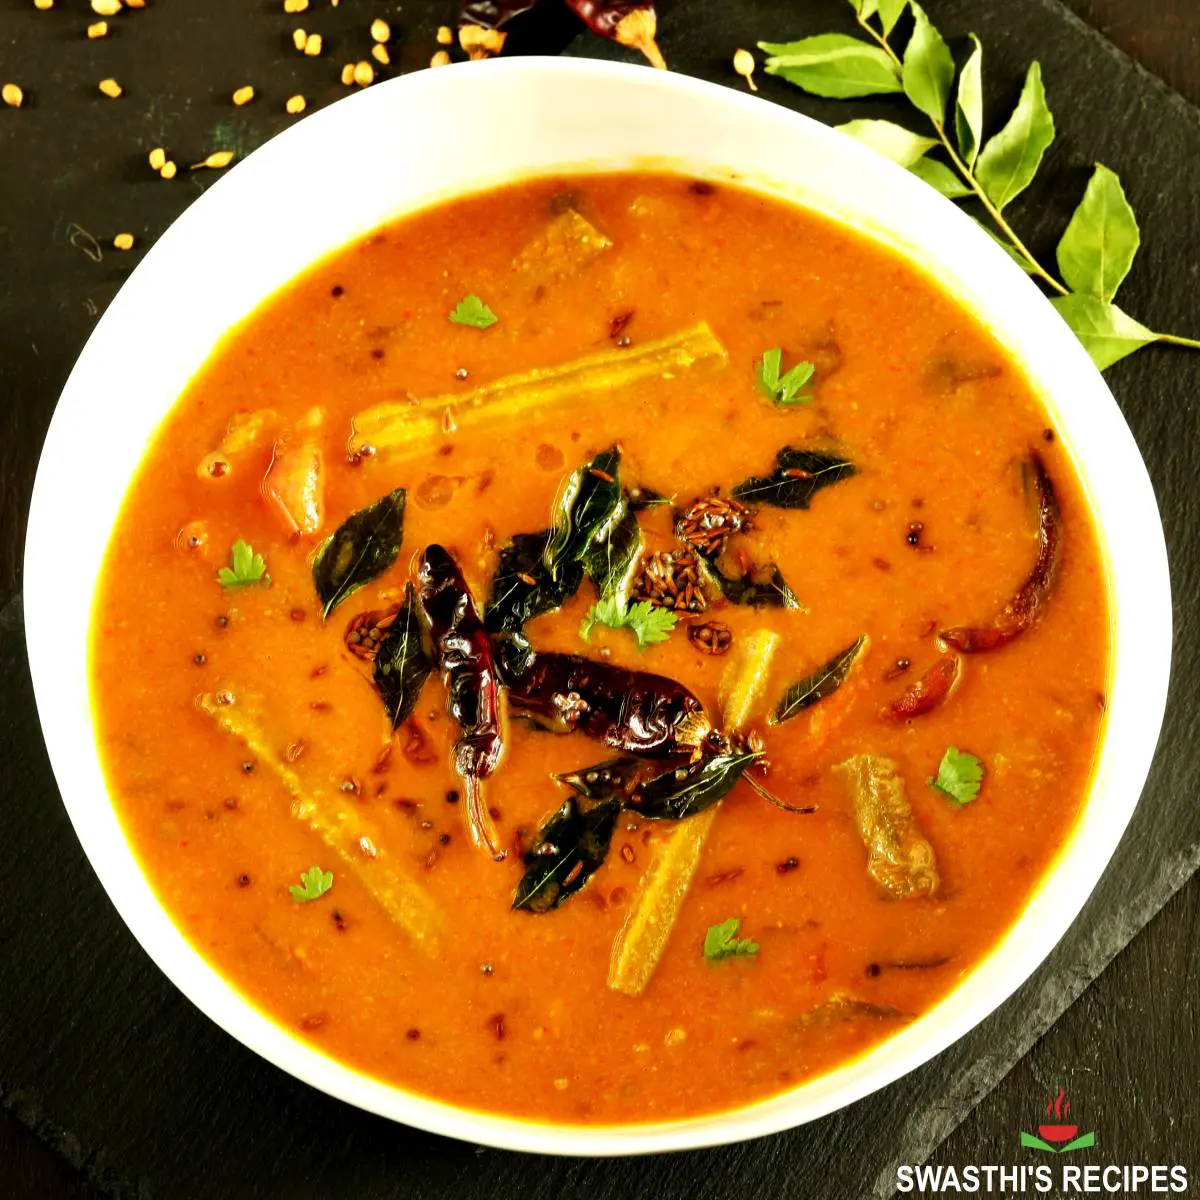 Sambar recipe made with lentils, spices, vegetables and herbs